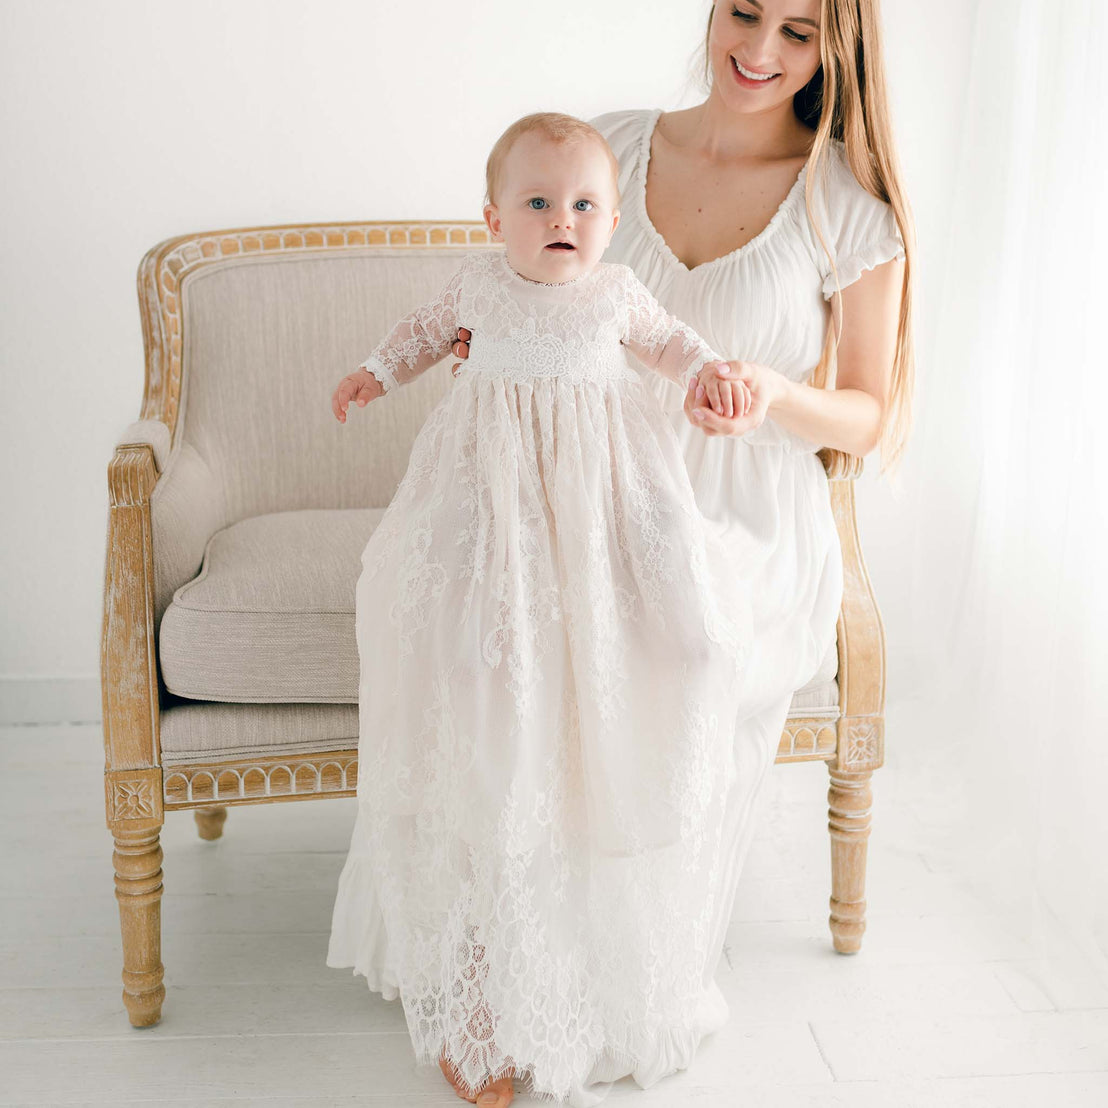 A mother, smiling, helps her baby daughter in a Juliette Christening Gown & Bonnet take her first steps beside an upscale chair in a bright room.